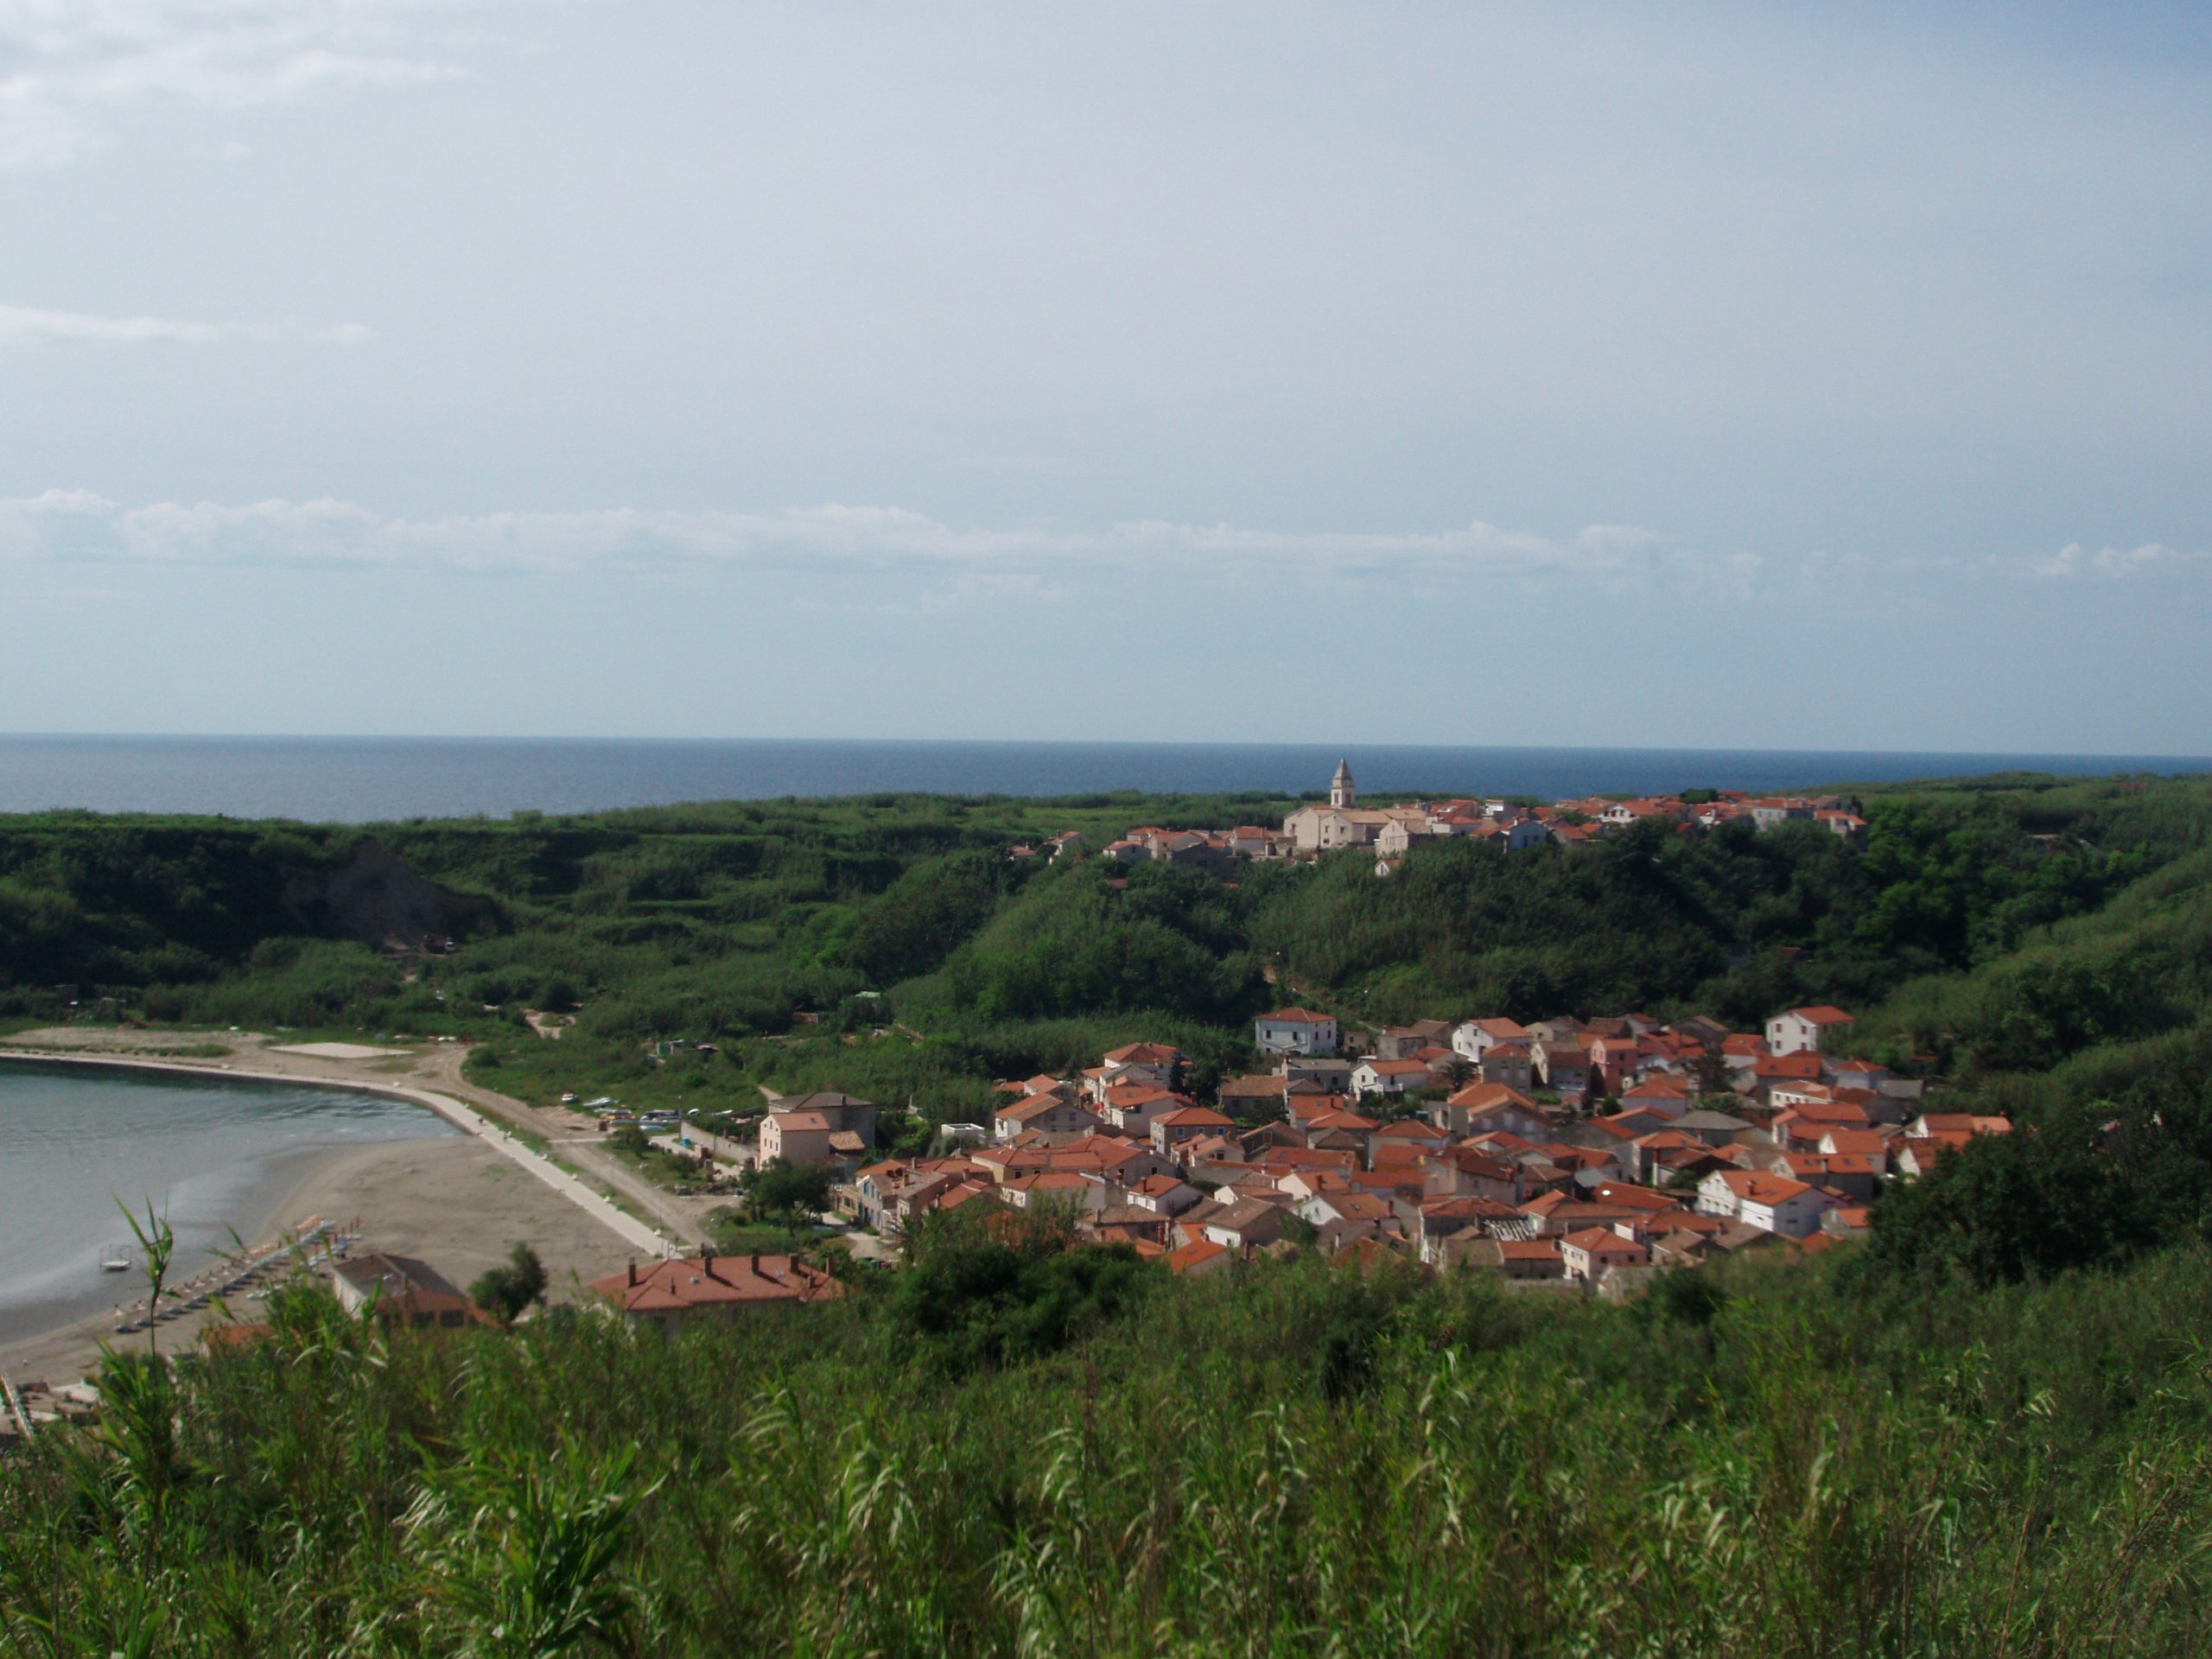 The upper and lower village of Susak, the island made of reed and sand, as seen from the path that leads toward the Susak Lighthouse. The lighthouse was built in 1881, and has been run by the same family for over thirty years now. They tend to the light, their garden, and their cats.